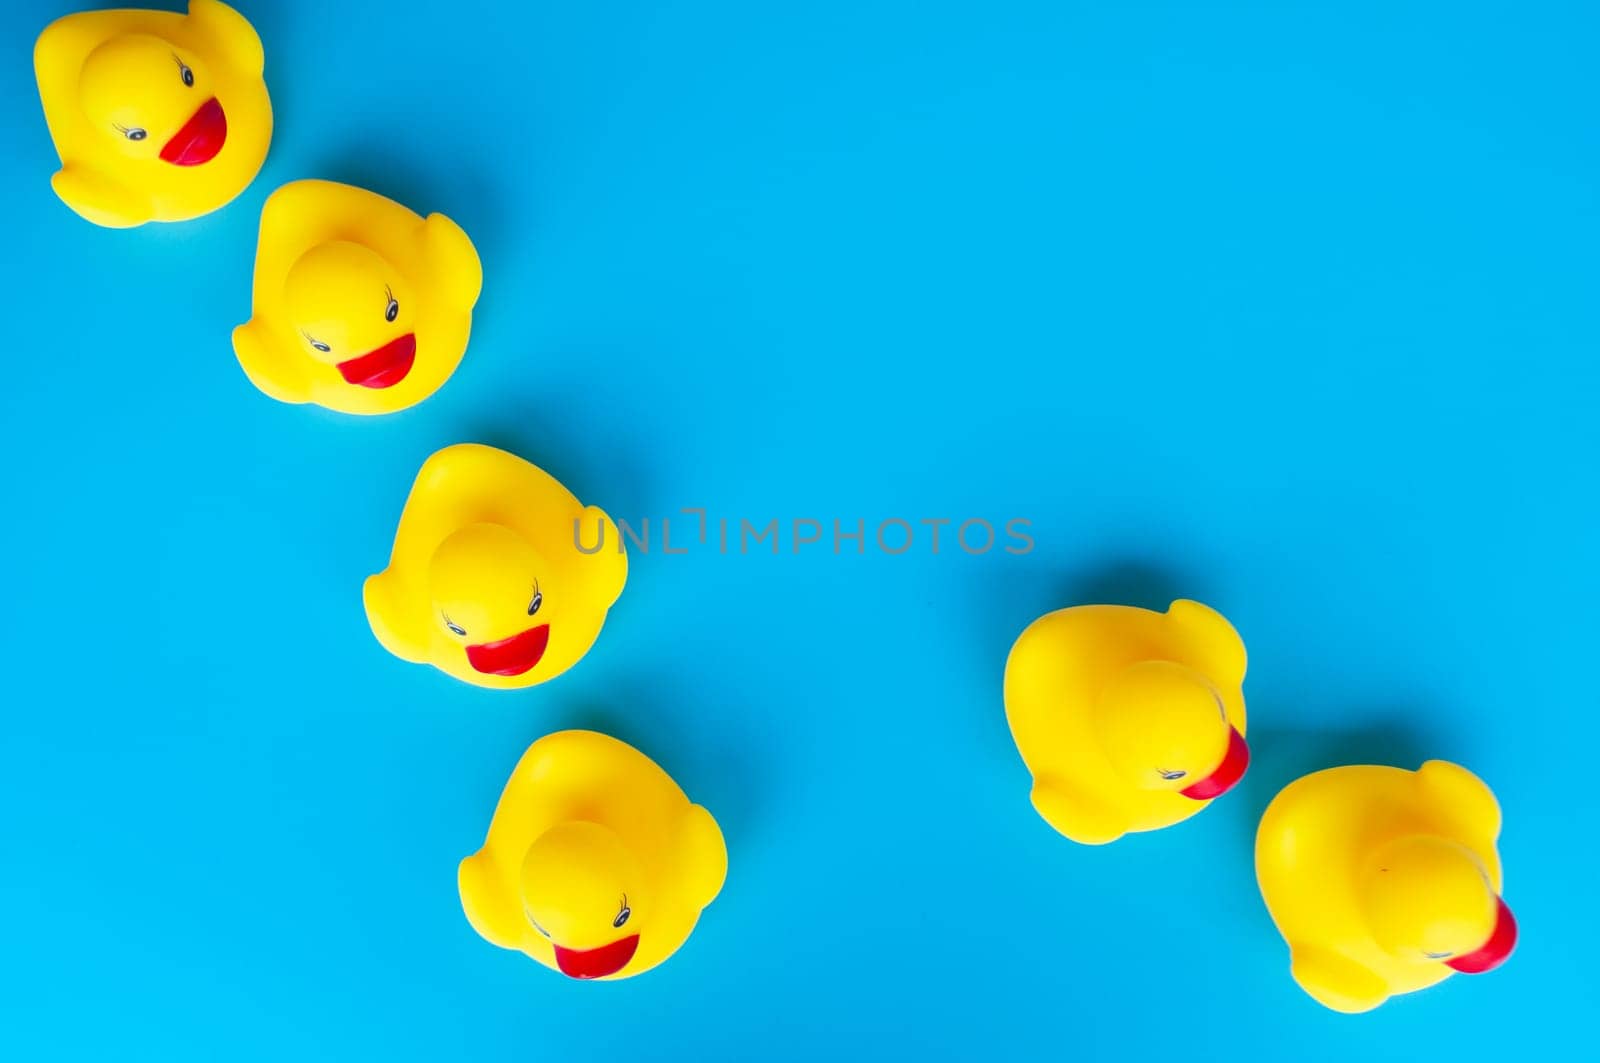 Top view of rubber ducks with customizable space for text.